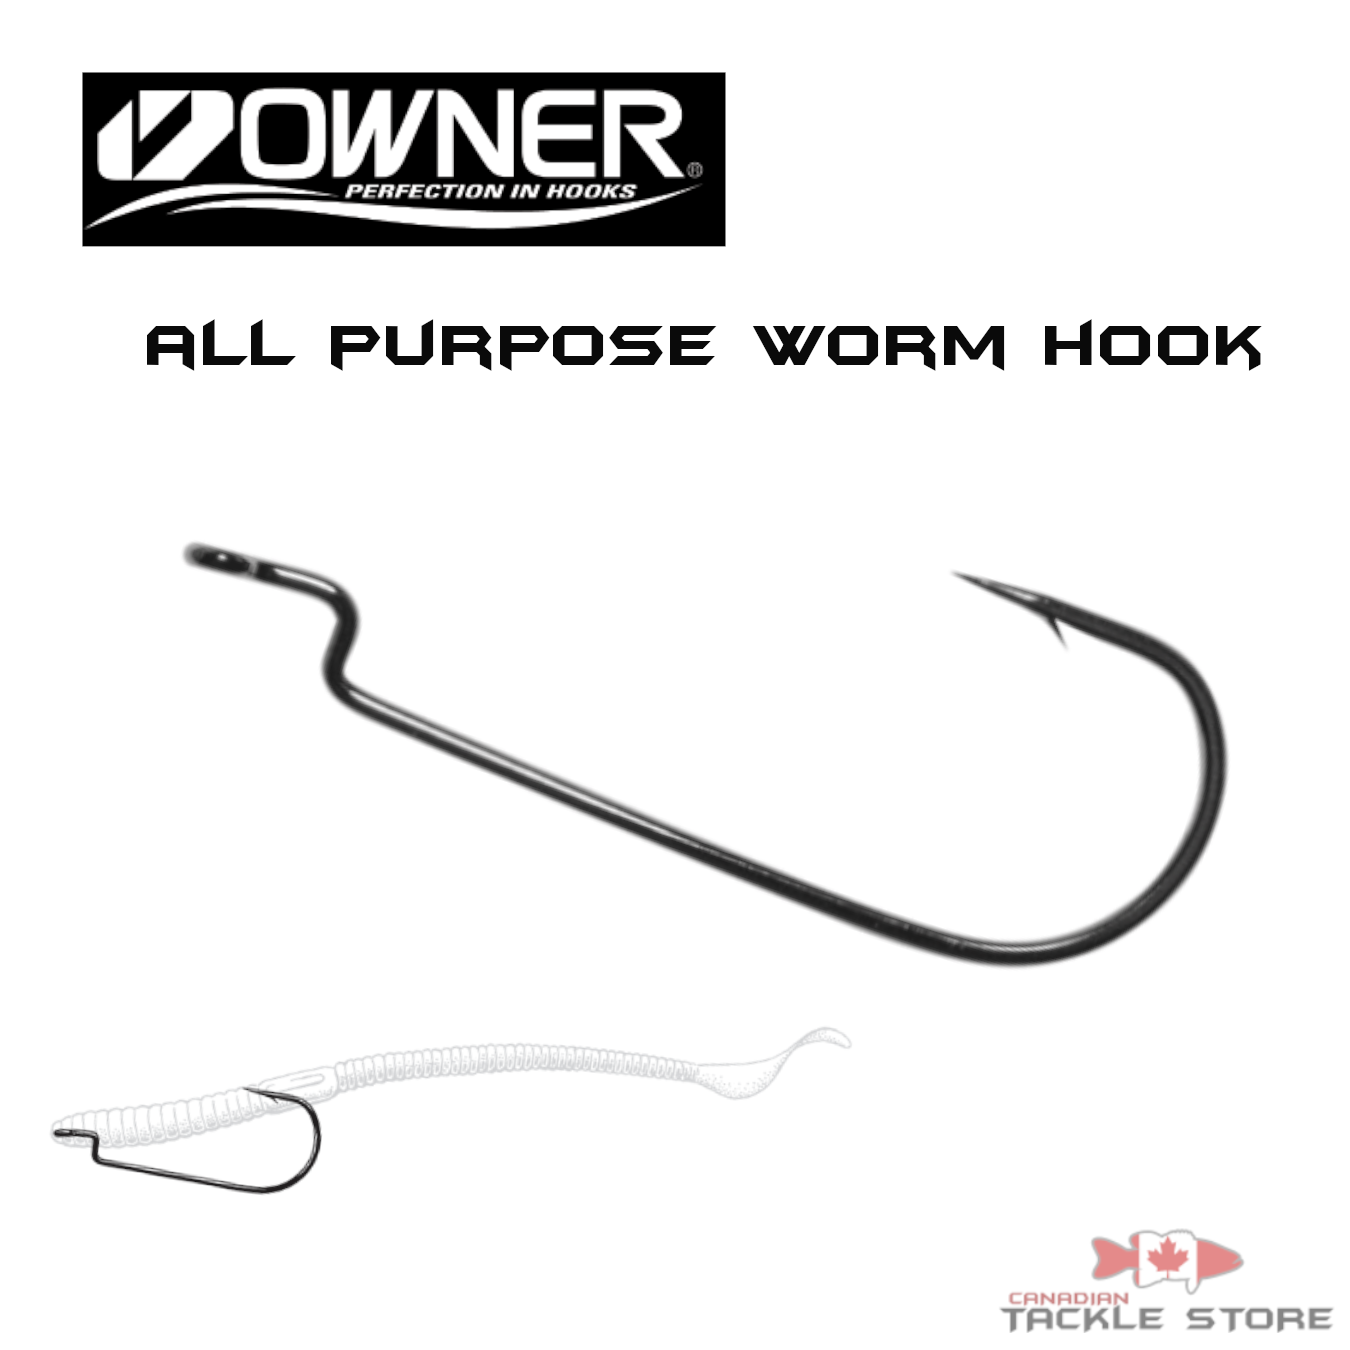 Owner All Purpose Worm Hook – Canadian Tackle Store